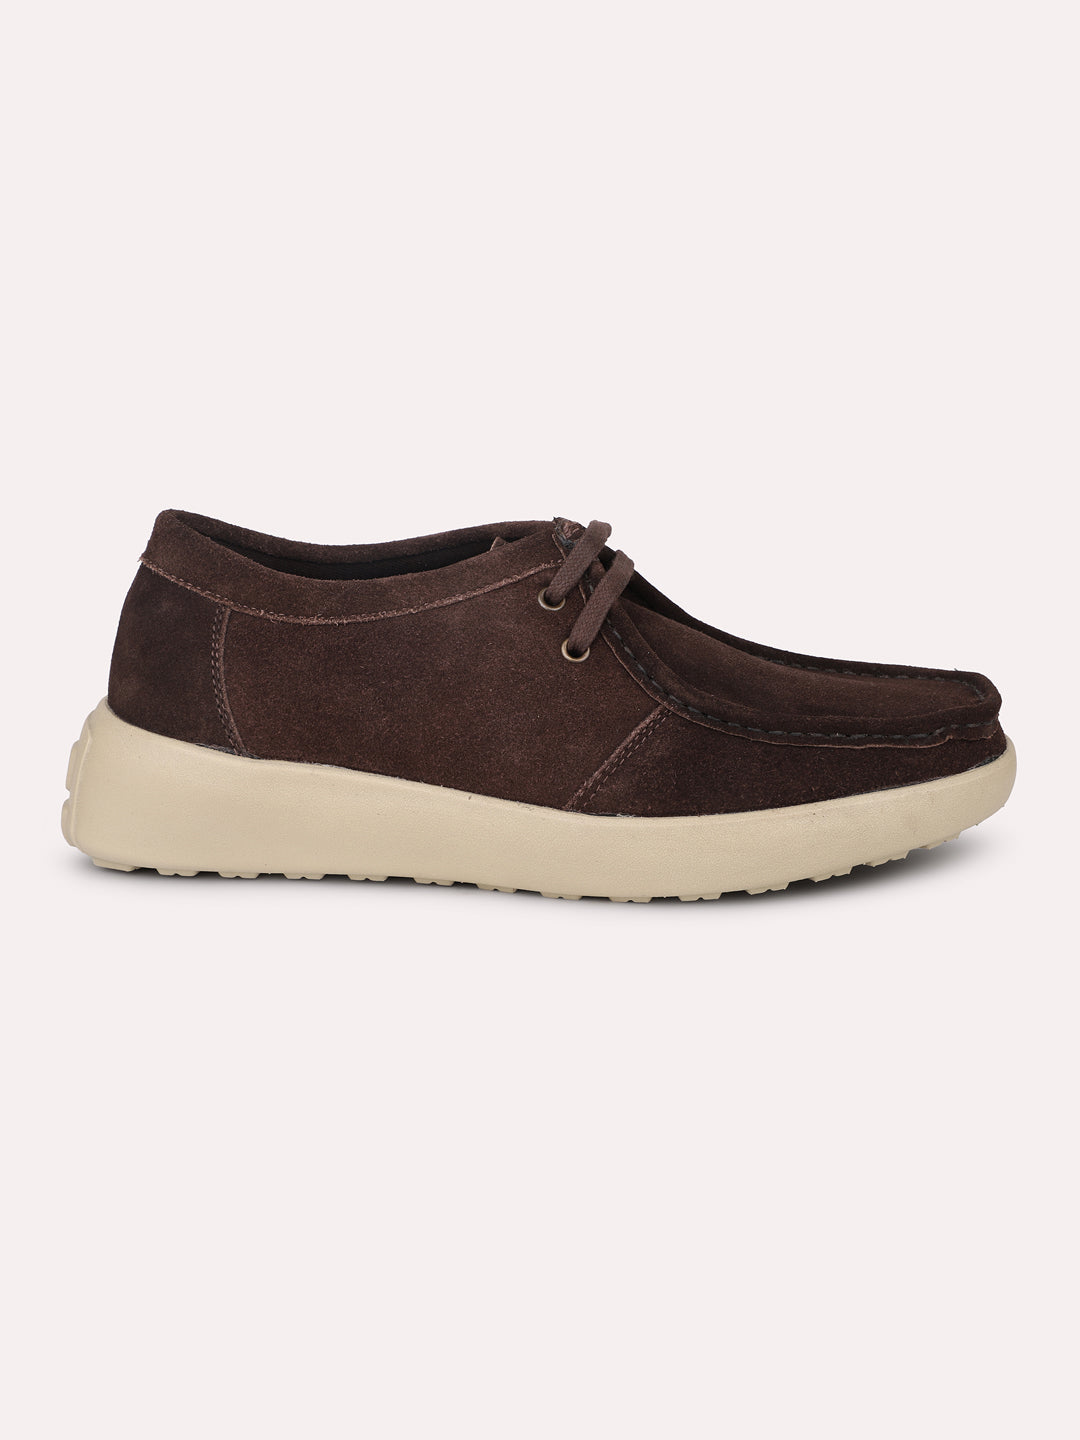 Privo Brown Casual Lace-Up Shoes For Men